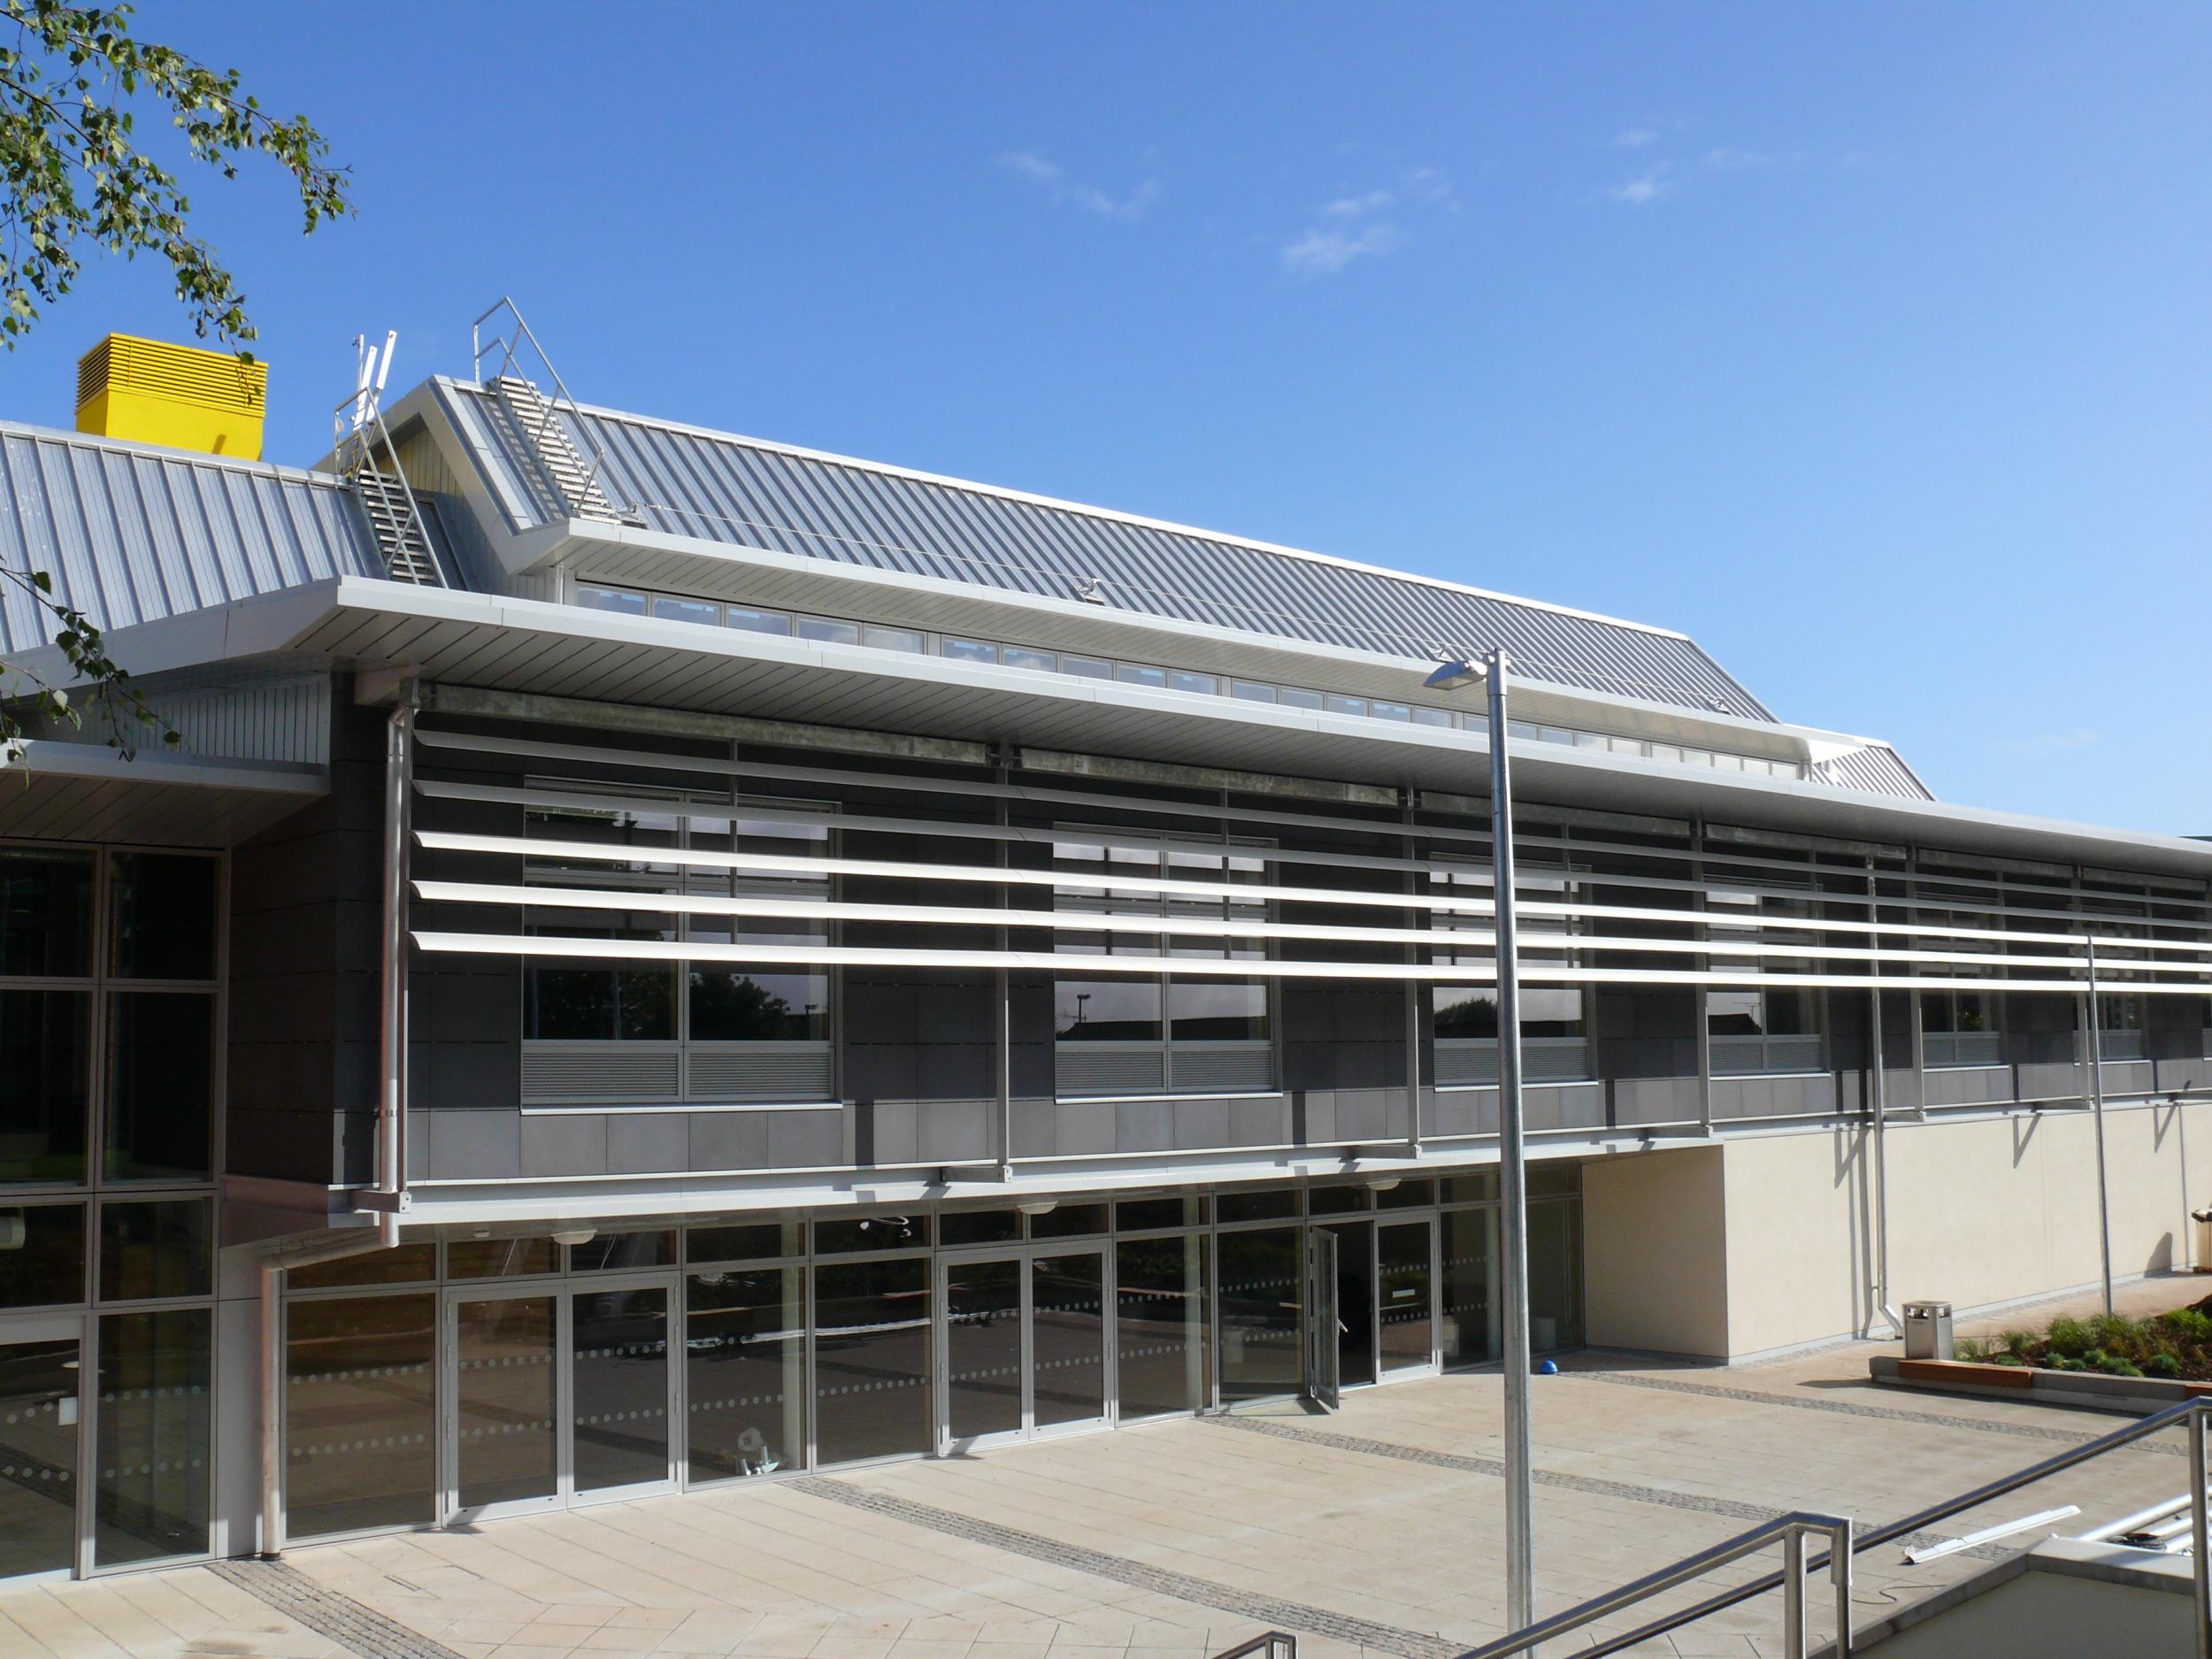 UWE Bristol's new facility for the Faculty of Environment and Technology